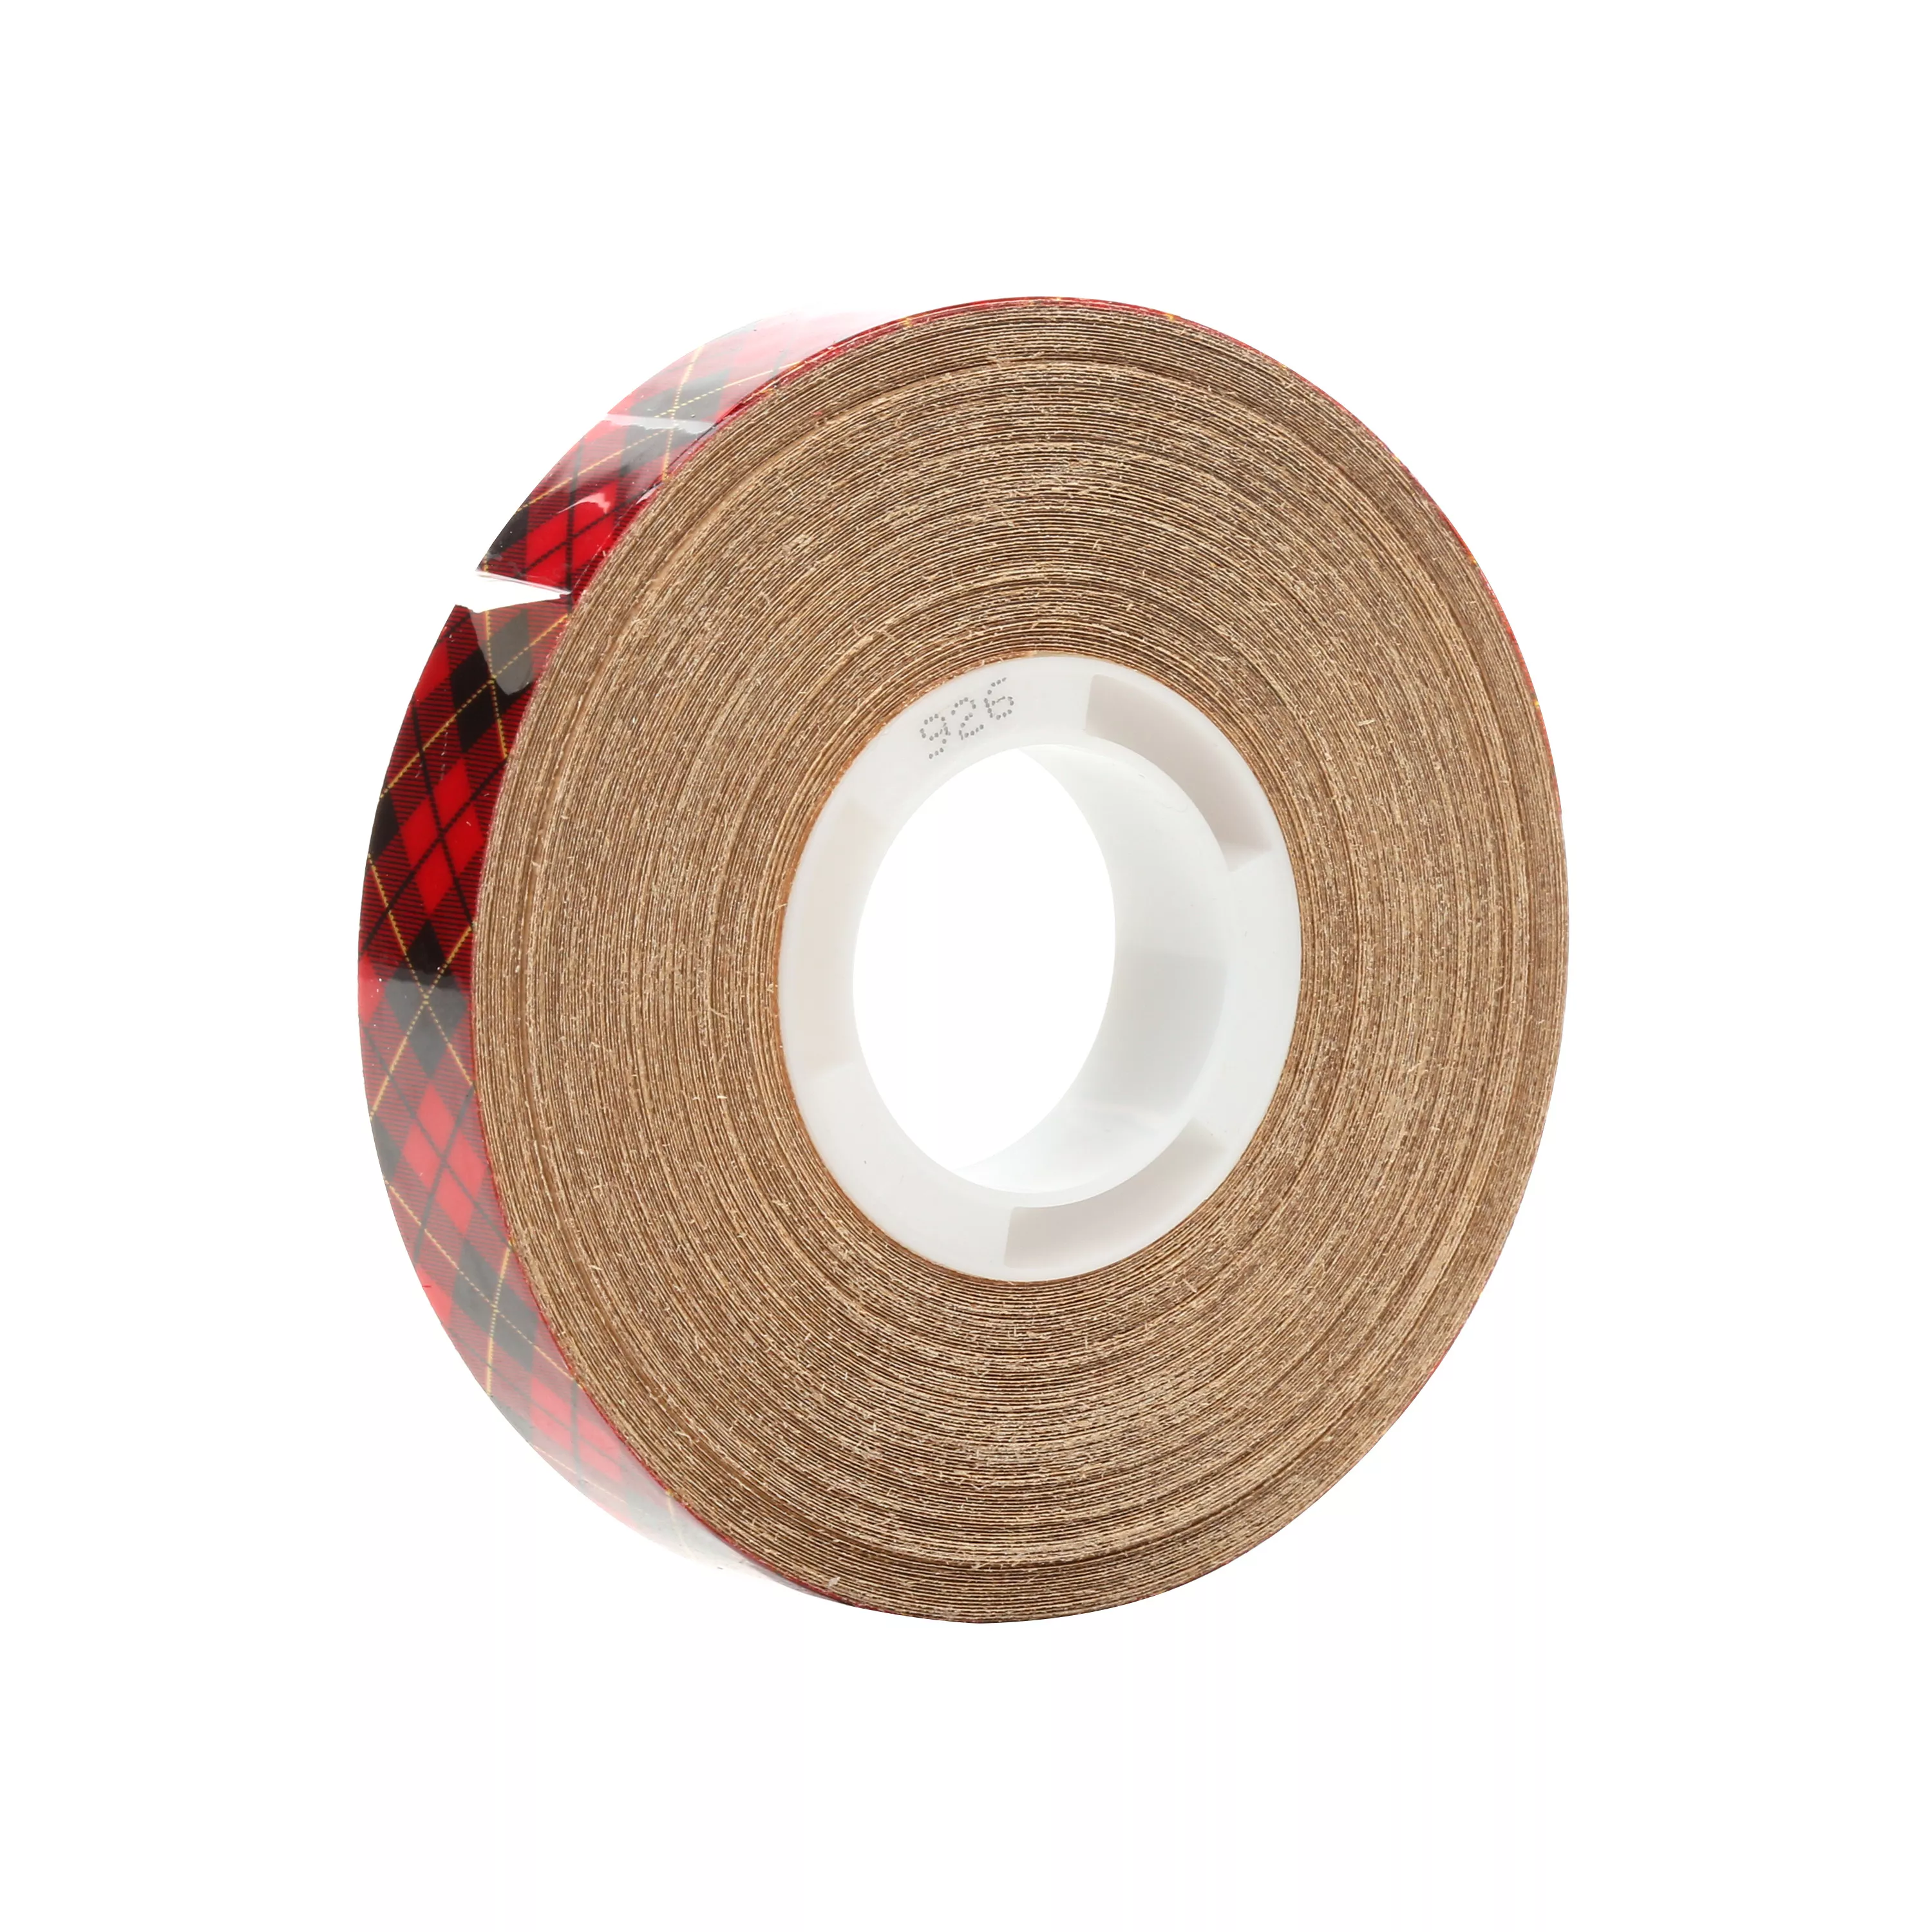 Scotch® ATG Adhesive Transfer Tape 926, Clear, 1/2 in x 18 yd, 5 mil,
(12 Roll/Pack) 72 Roll/Case